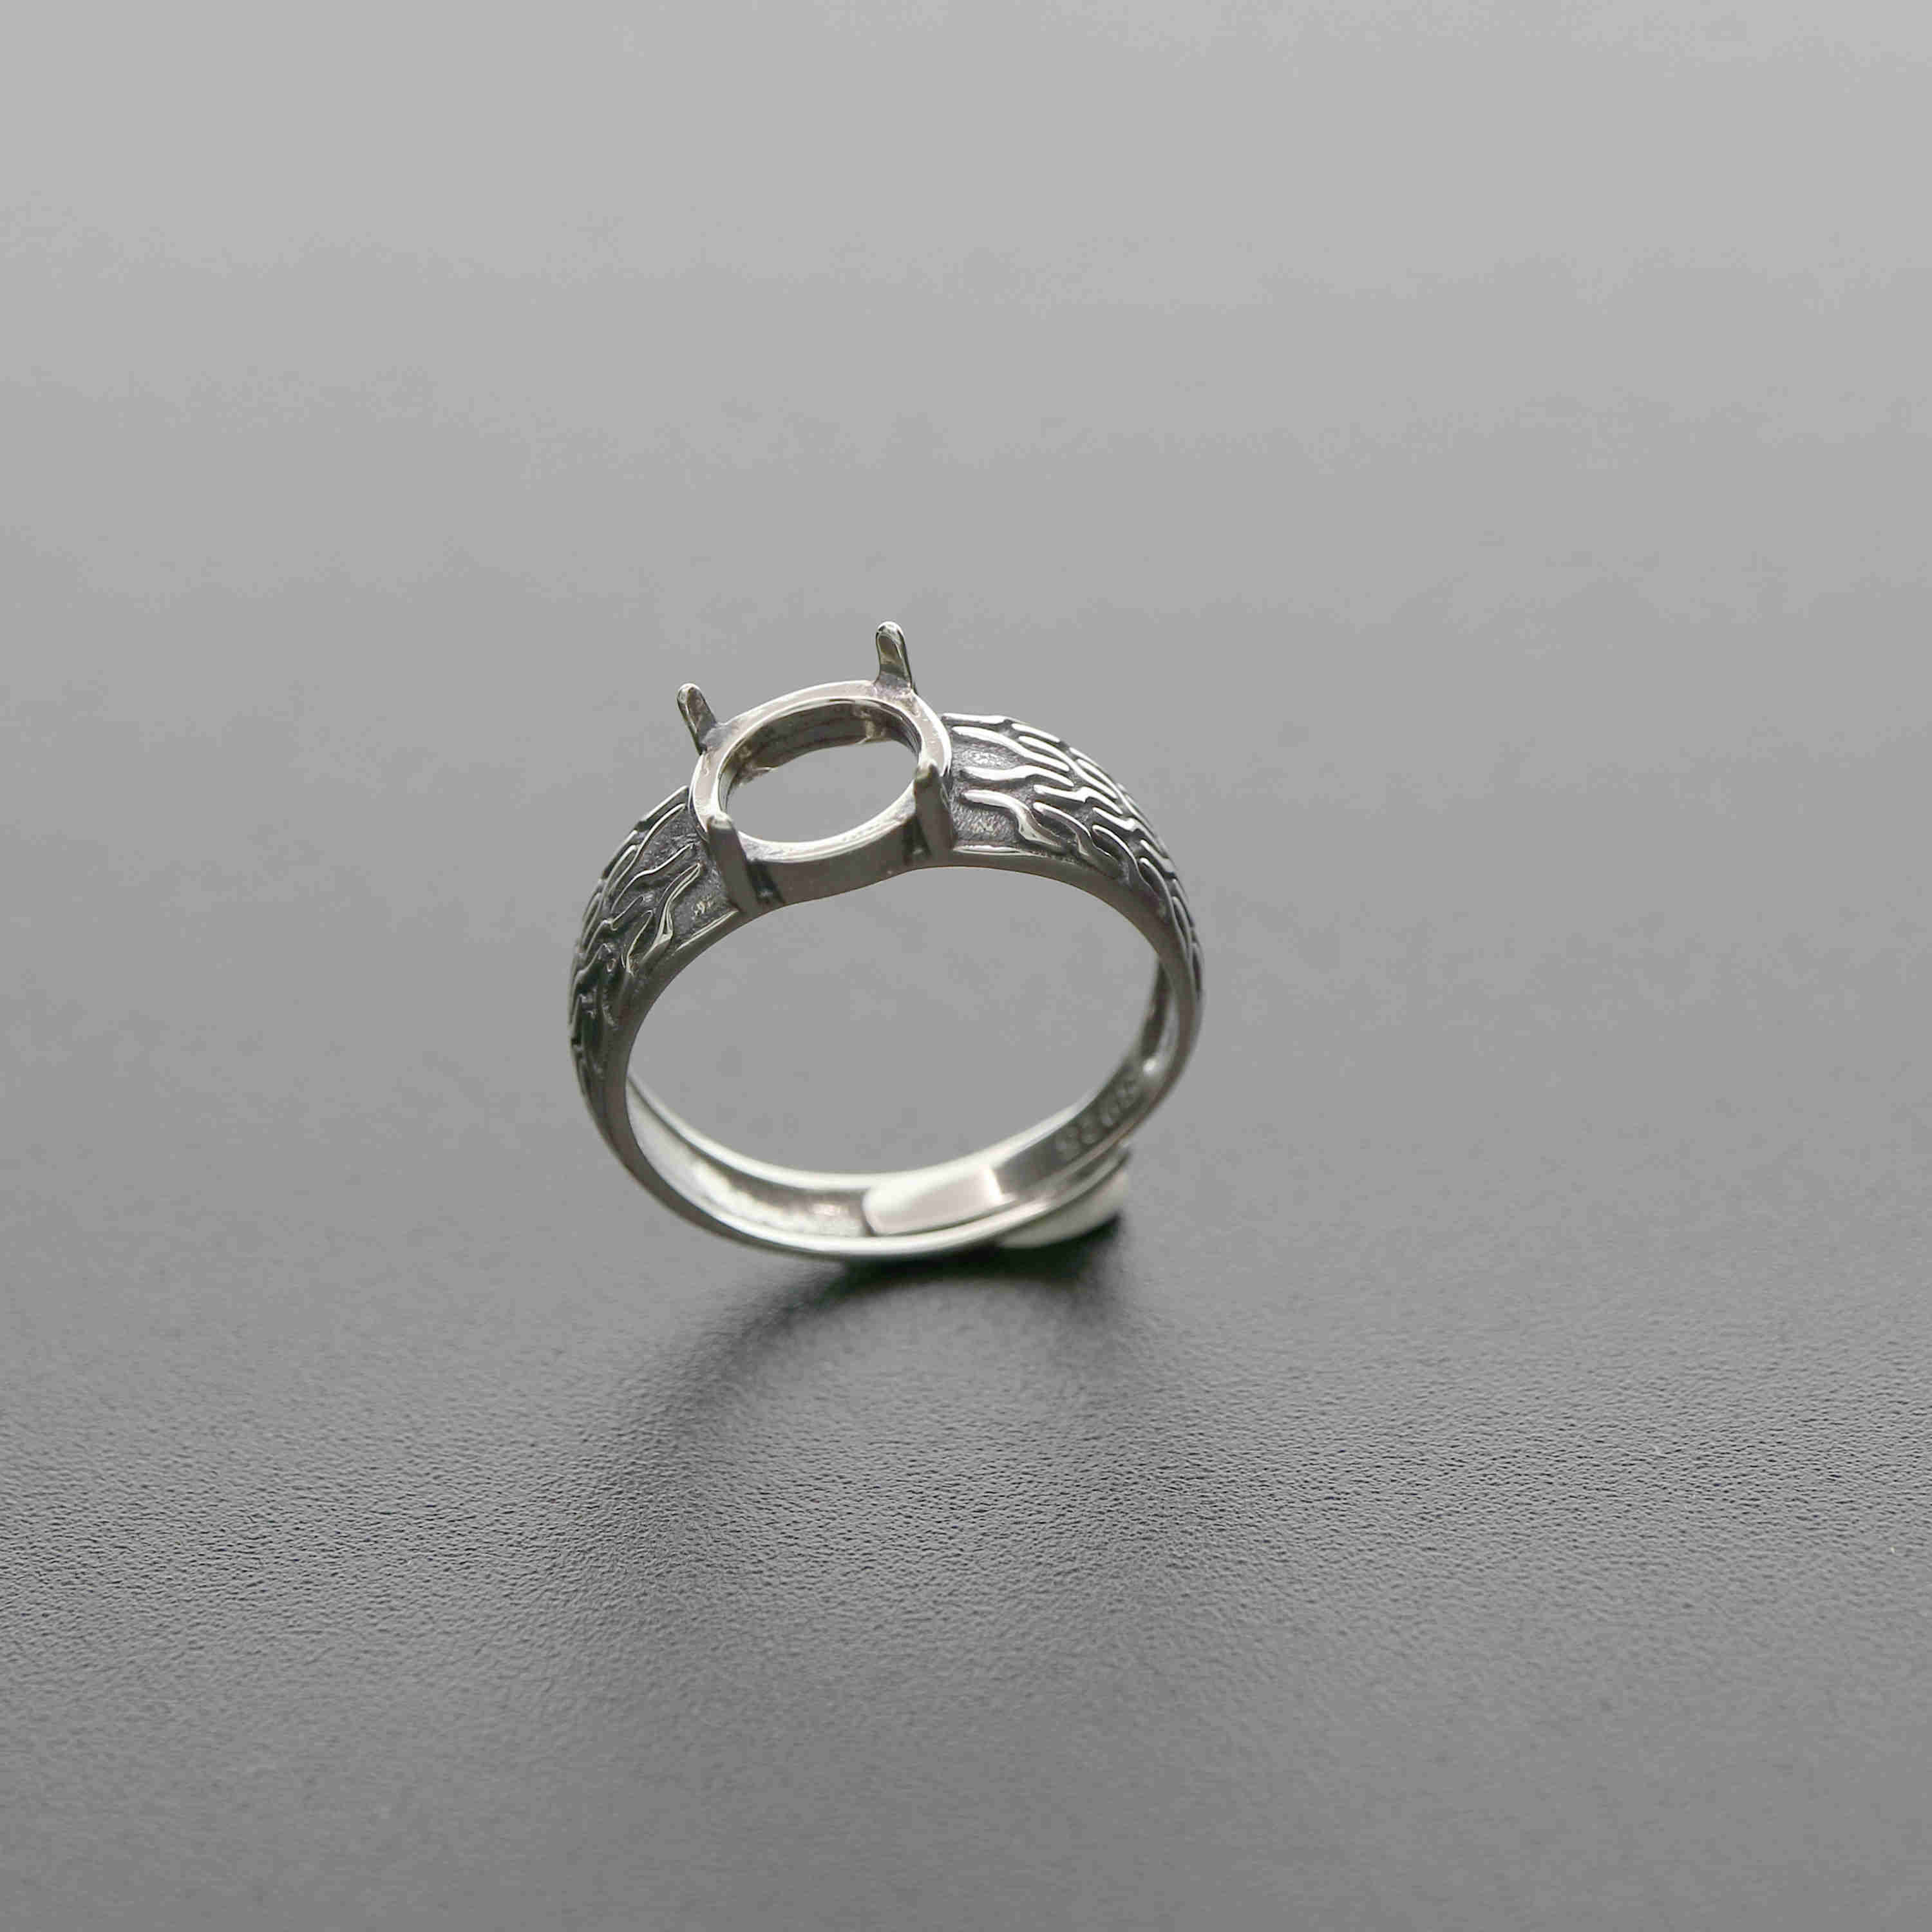 1Pcs 8MM Round Vintage Style Antiqued Silver Gems Cabochon Stone Prong Bezel Solid 925 Sterling Silver Adjustable Ring Settings 1213044 - Click Image to Close